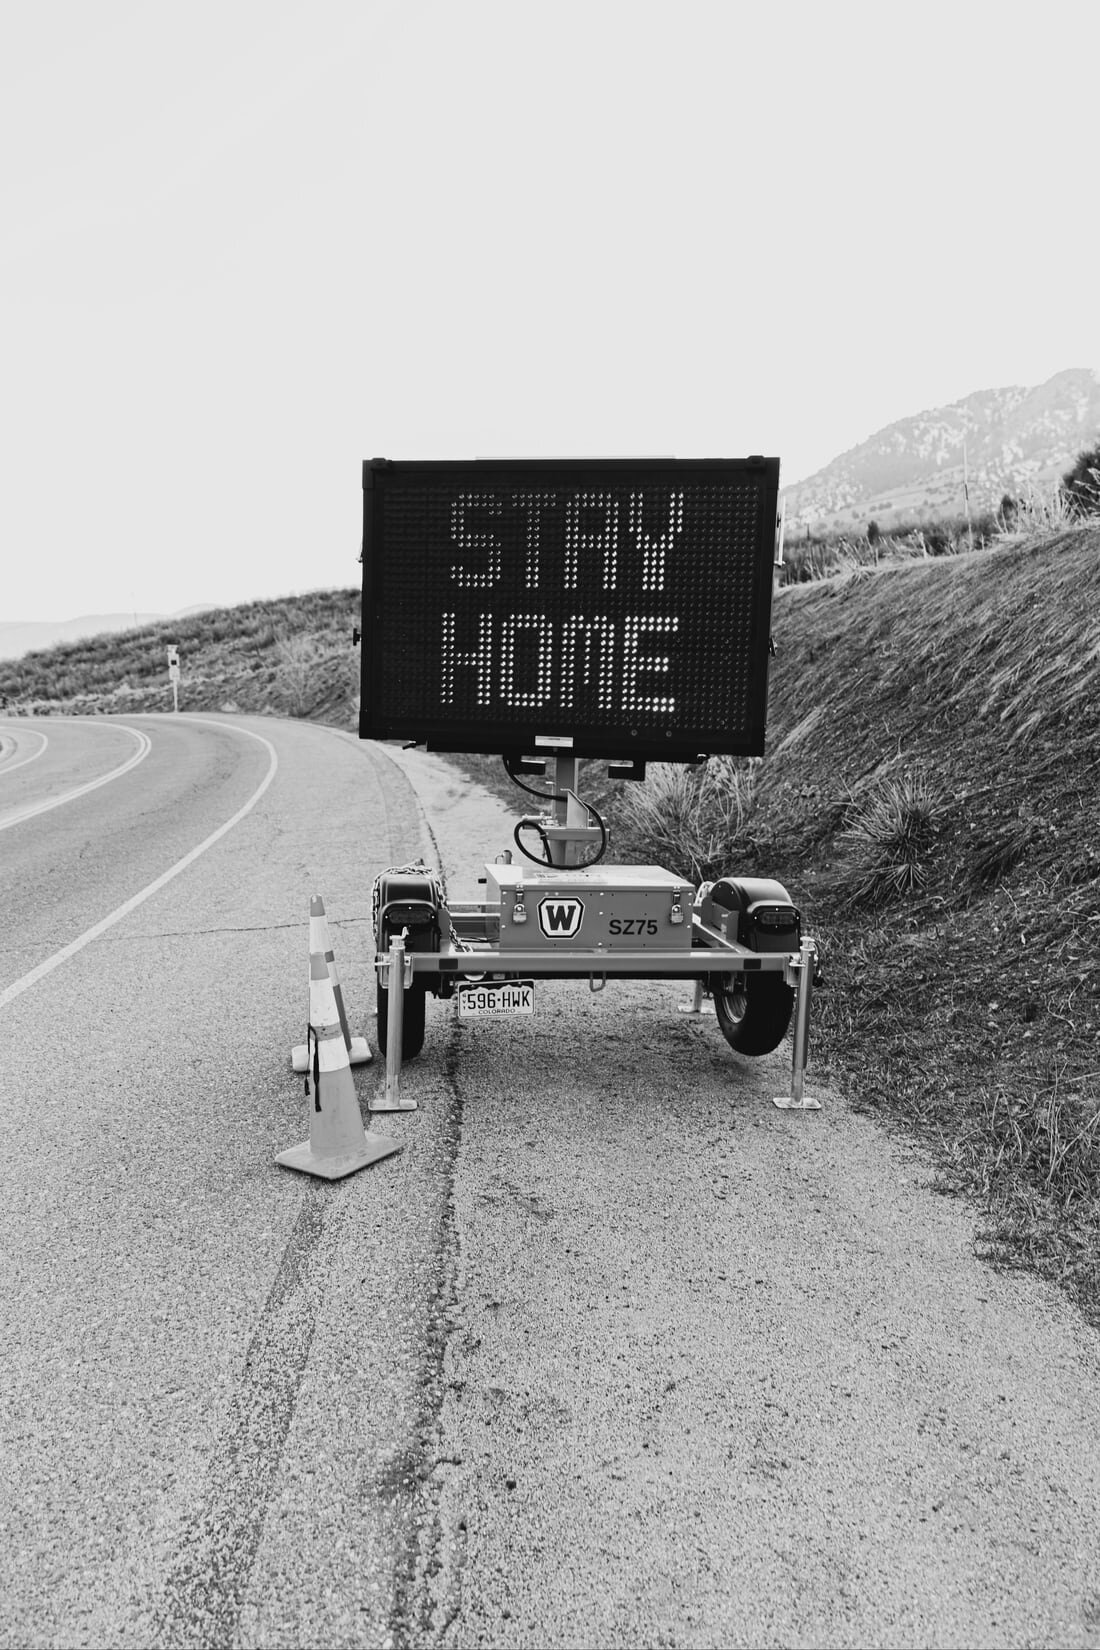 A temporary construction road sign that says STAY HOME. Via Unsplash.